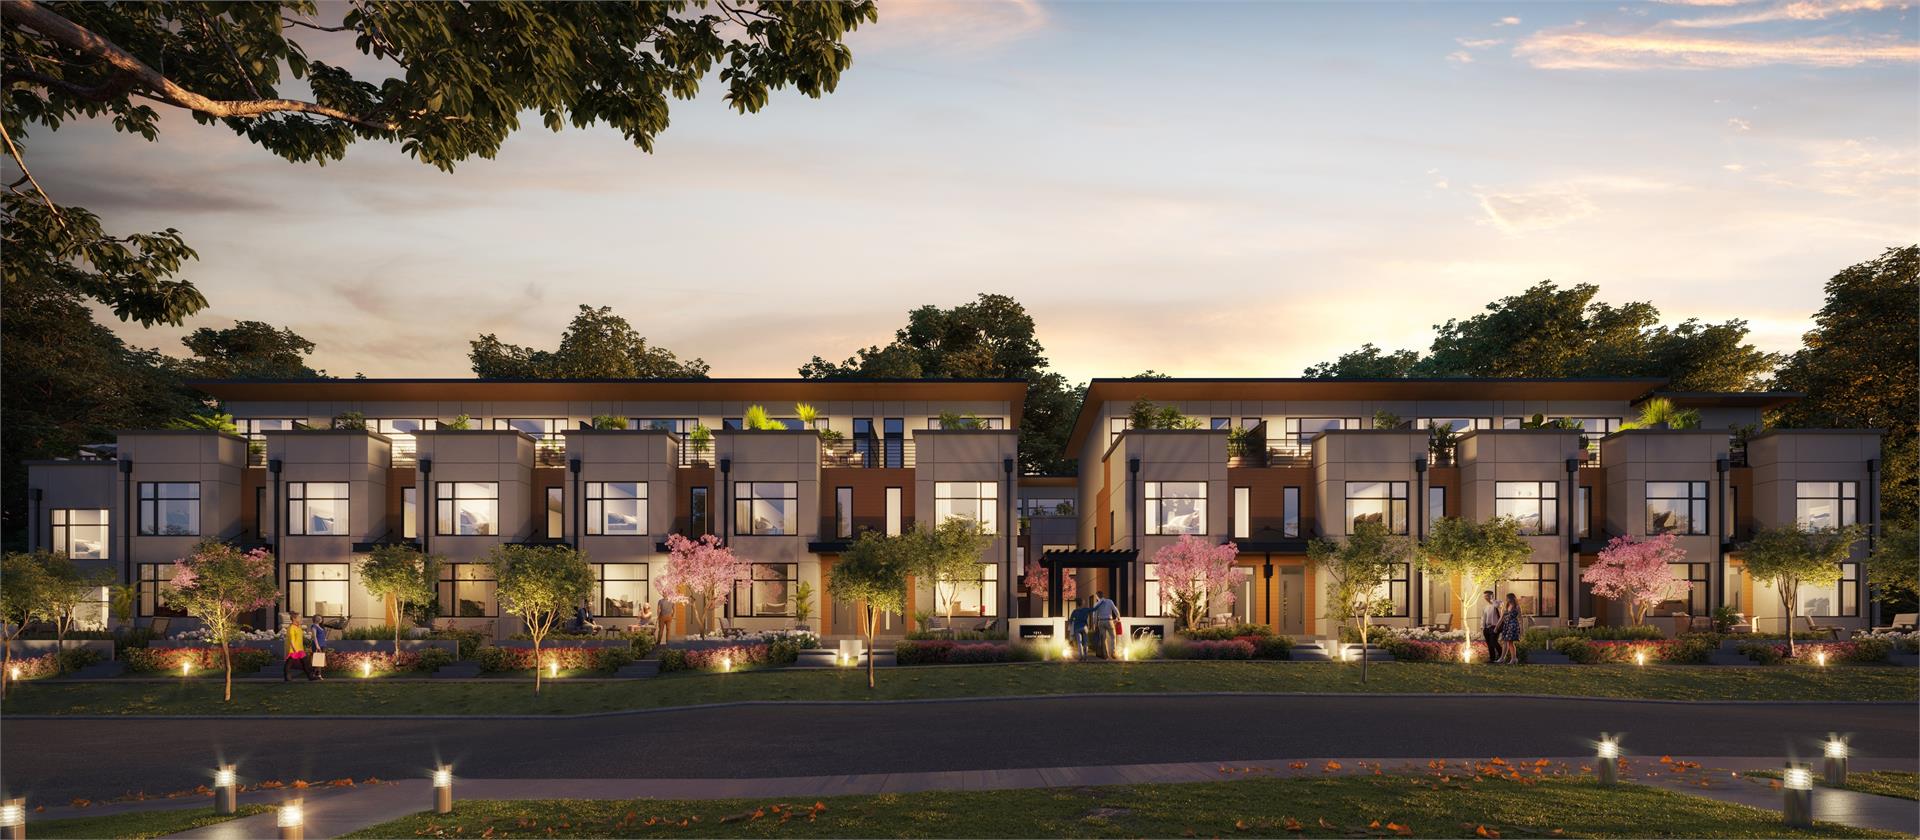 Introducing a unique collection of 22 Townhomes with trendy finishes in the vibrant city of New Westminster.